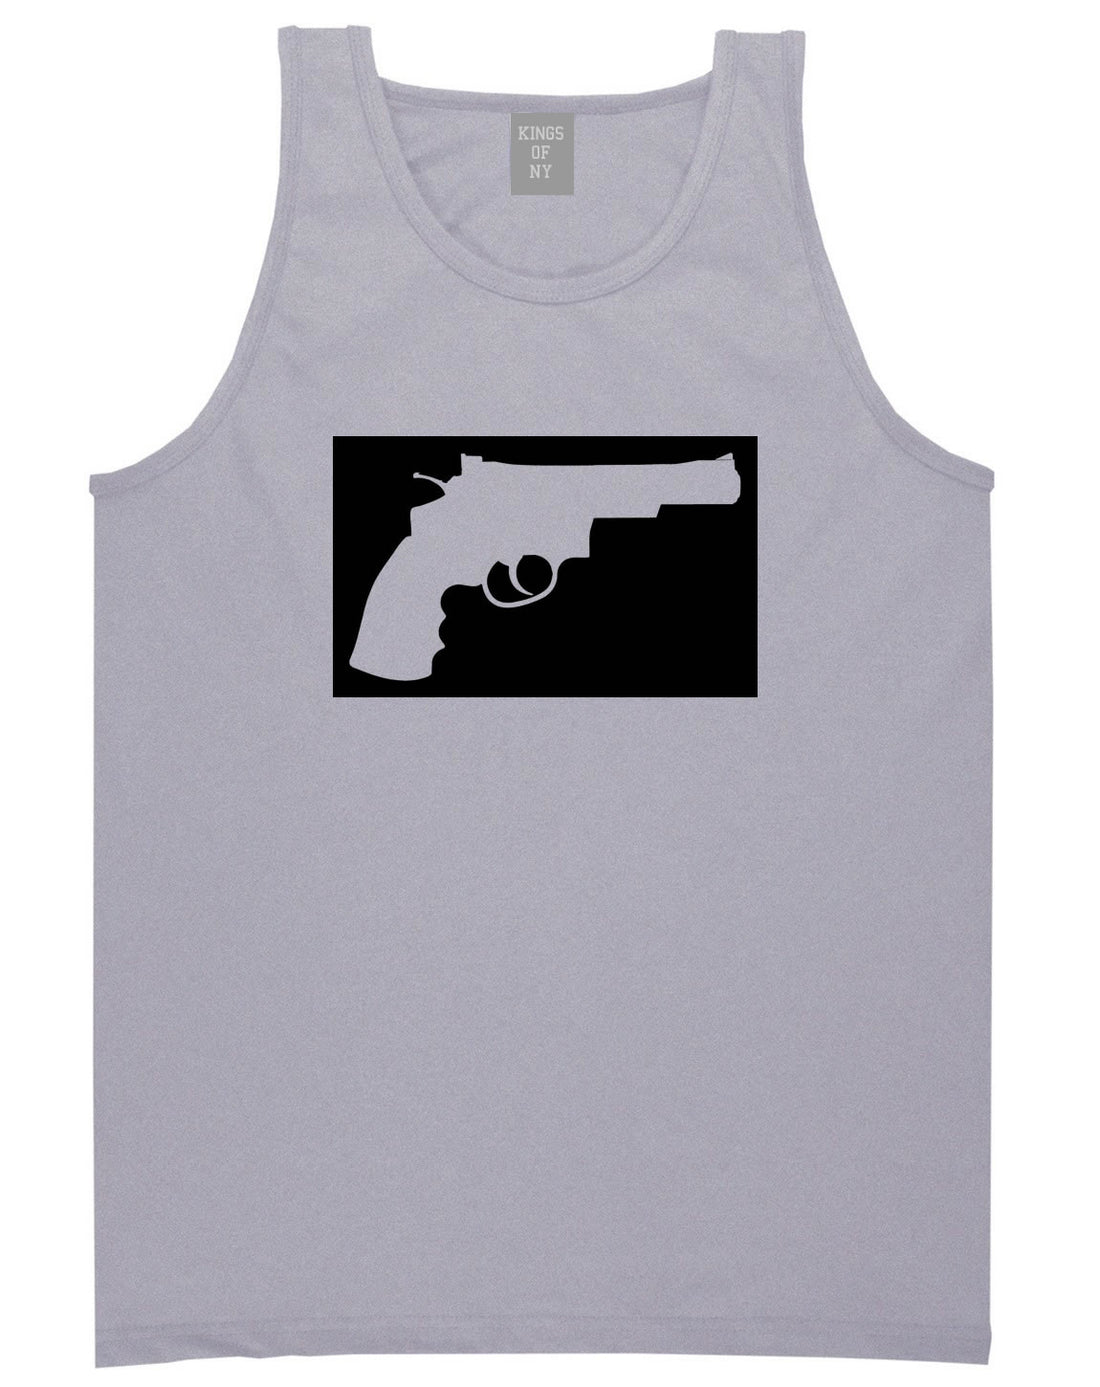 Gun Silhouette Revolver 45 Chrome Tank Top in Grey By Kings Of NY